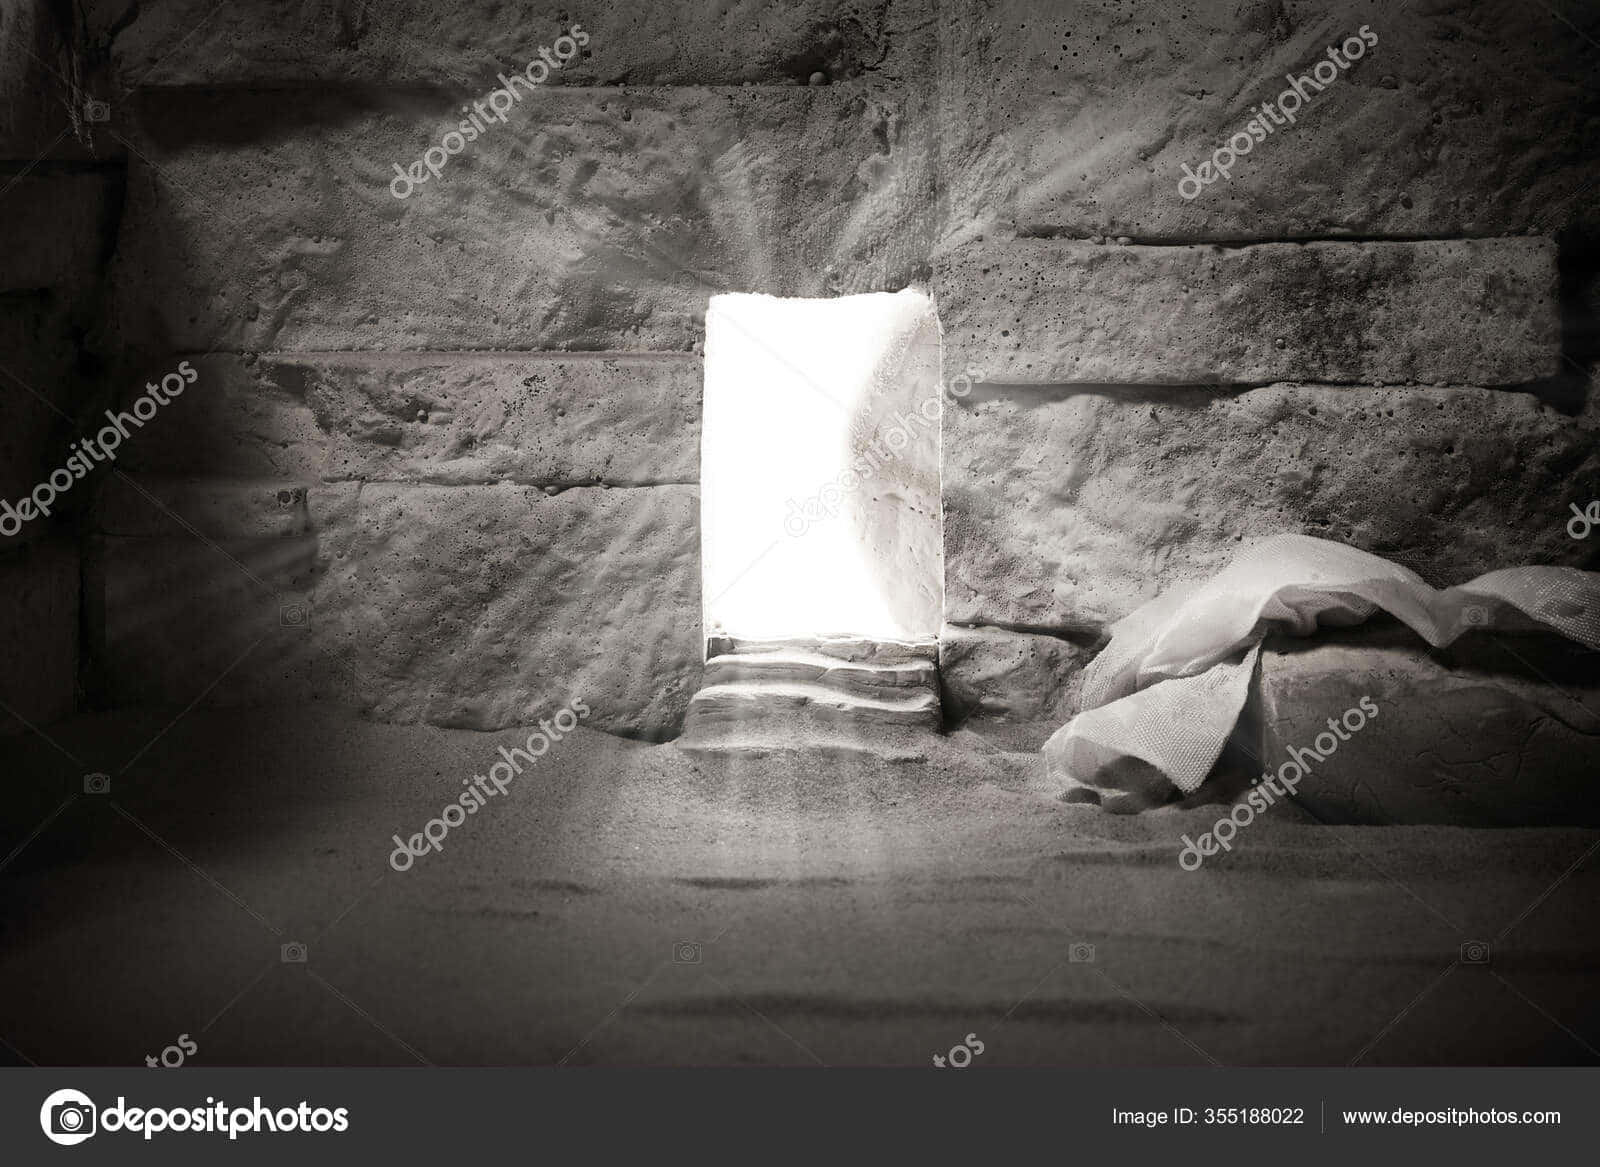 A Man Is Standing In A Cave With A Light Shining Through The Door Wallpaper